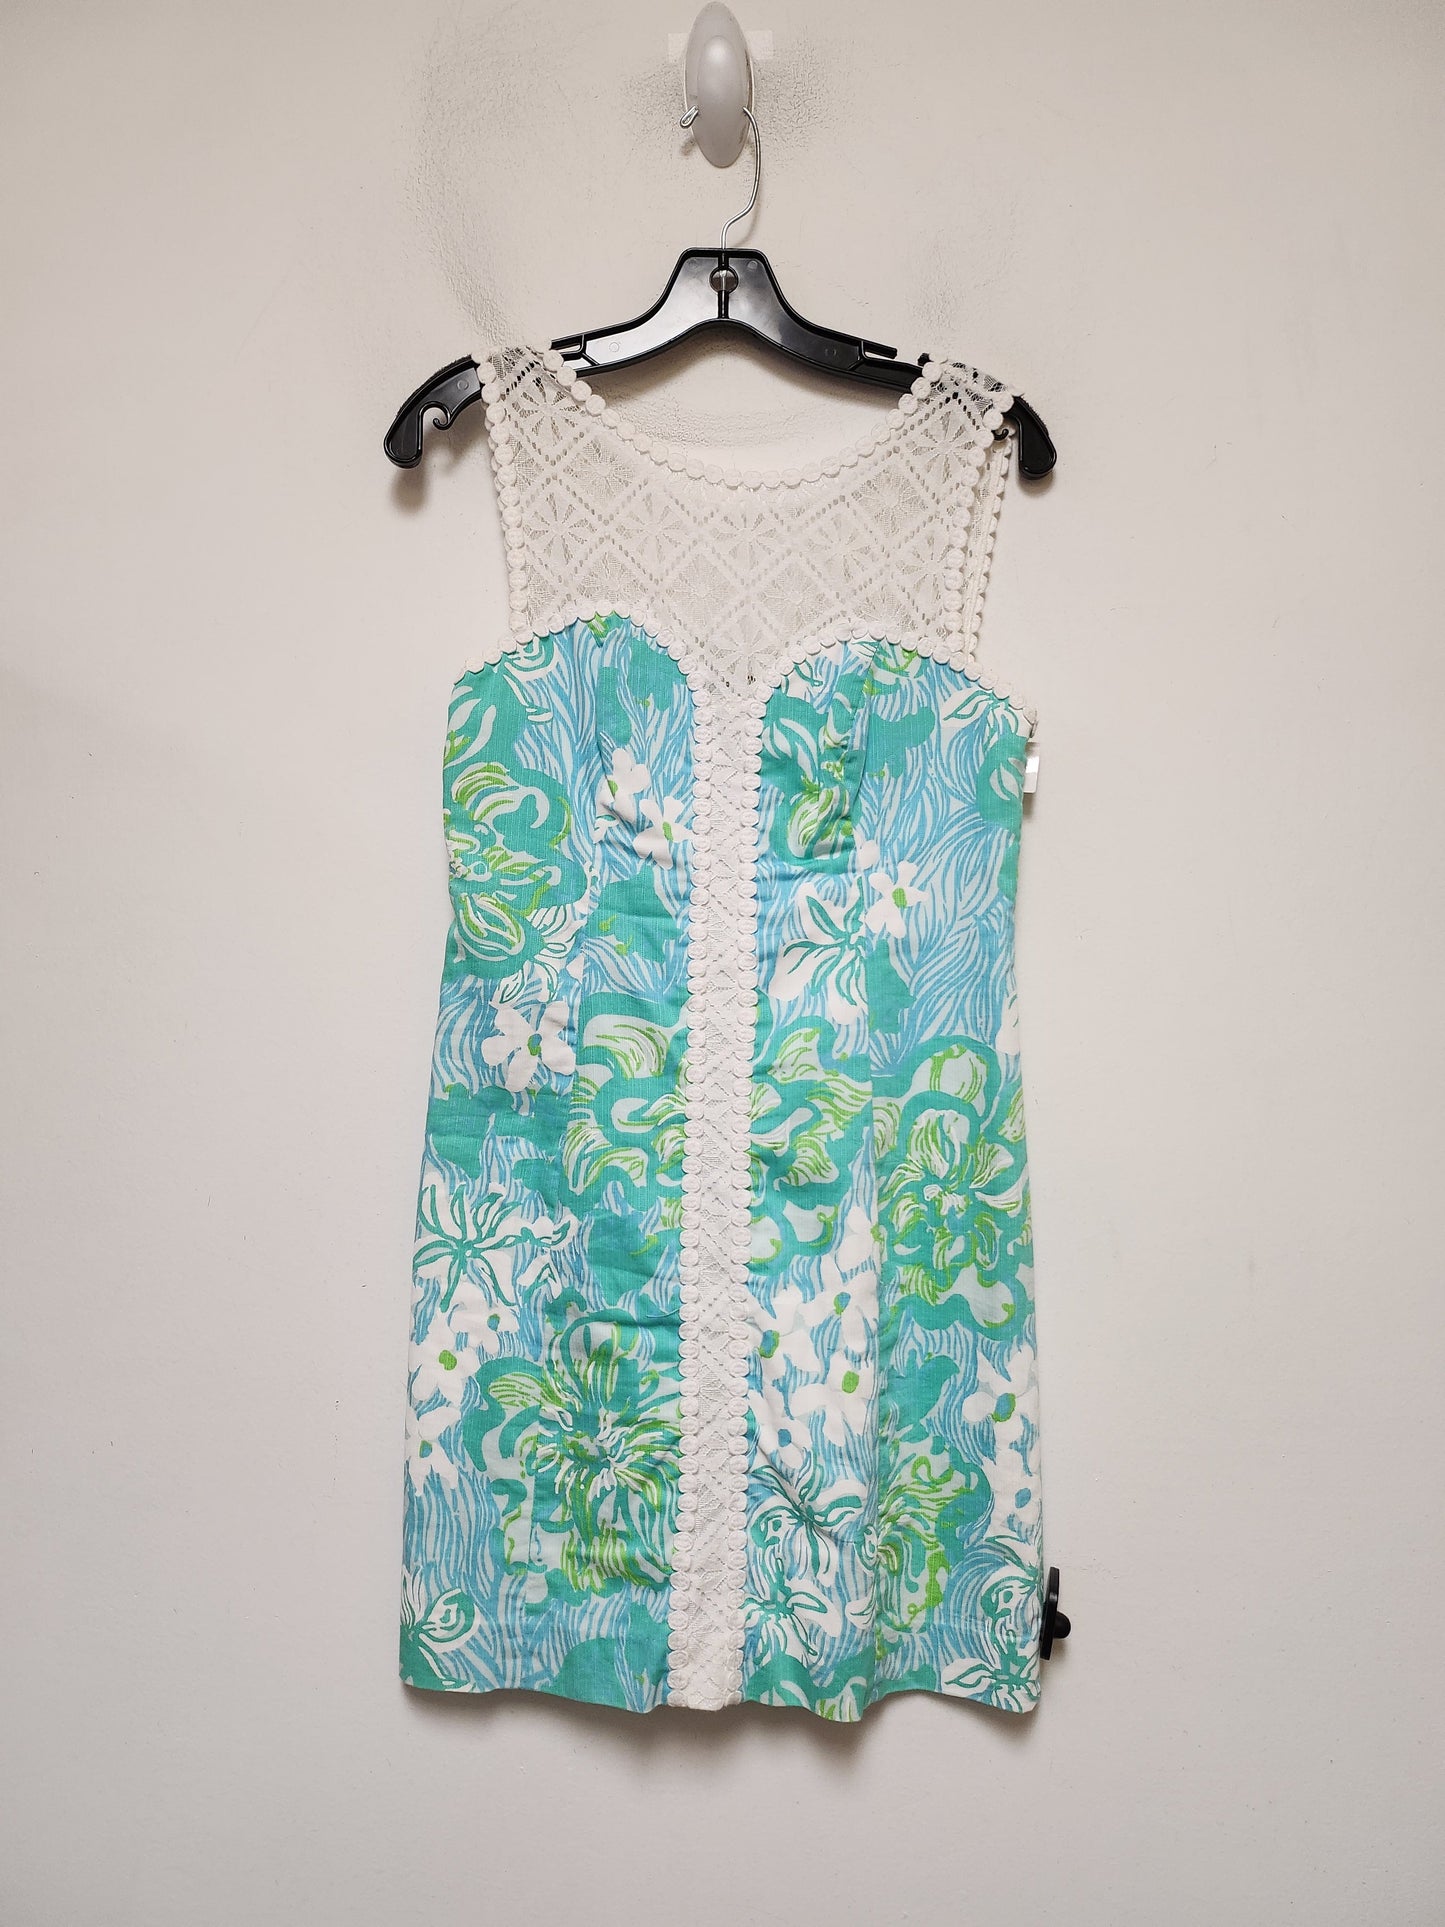 Blue & Green Dress Casual Short Lilly Pulitzer, Size Xs